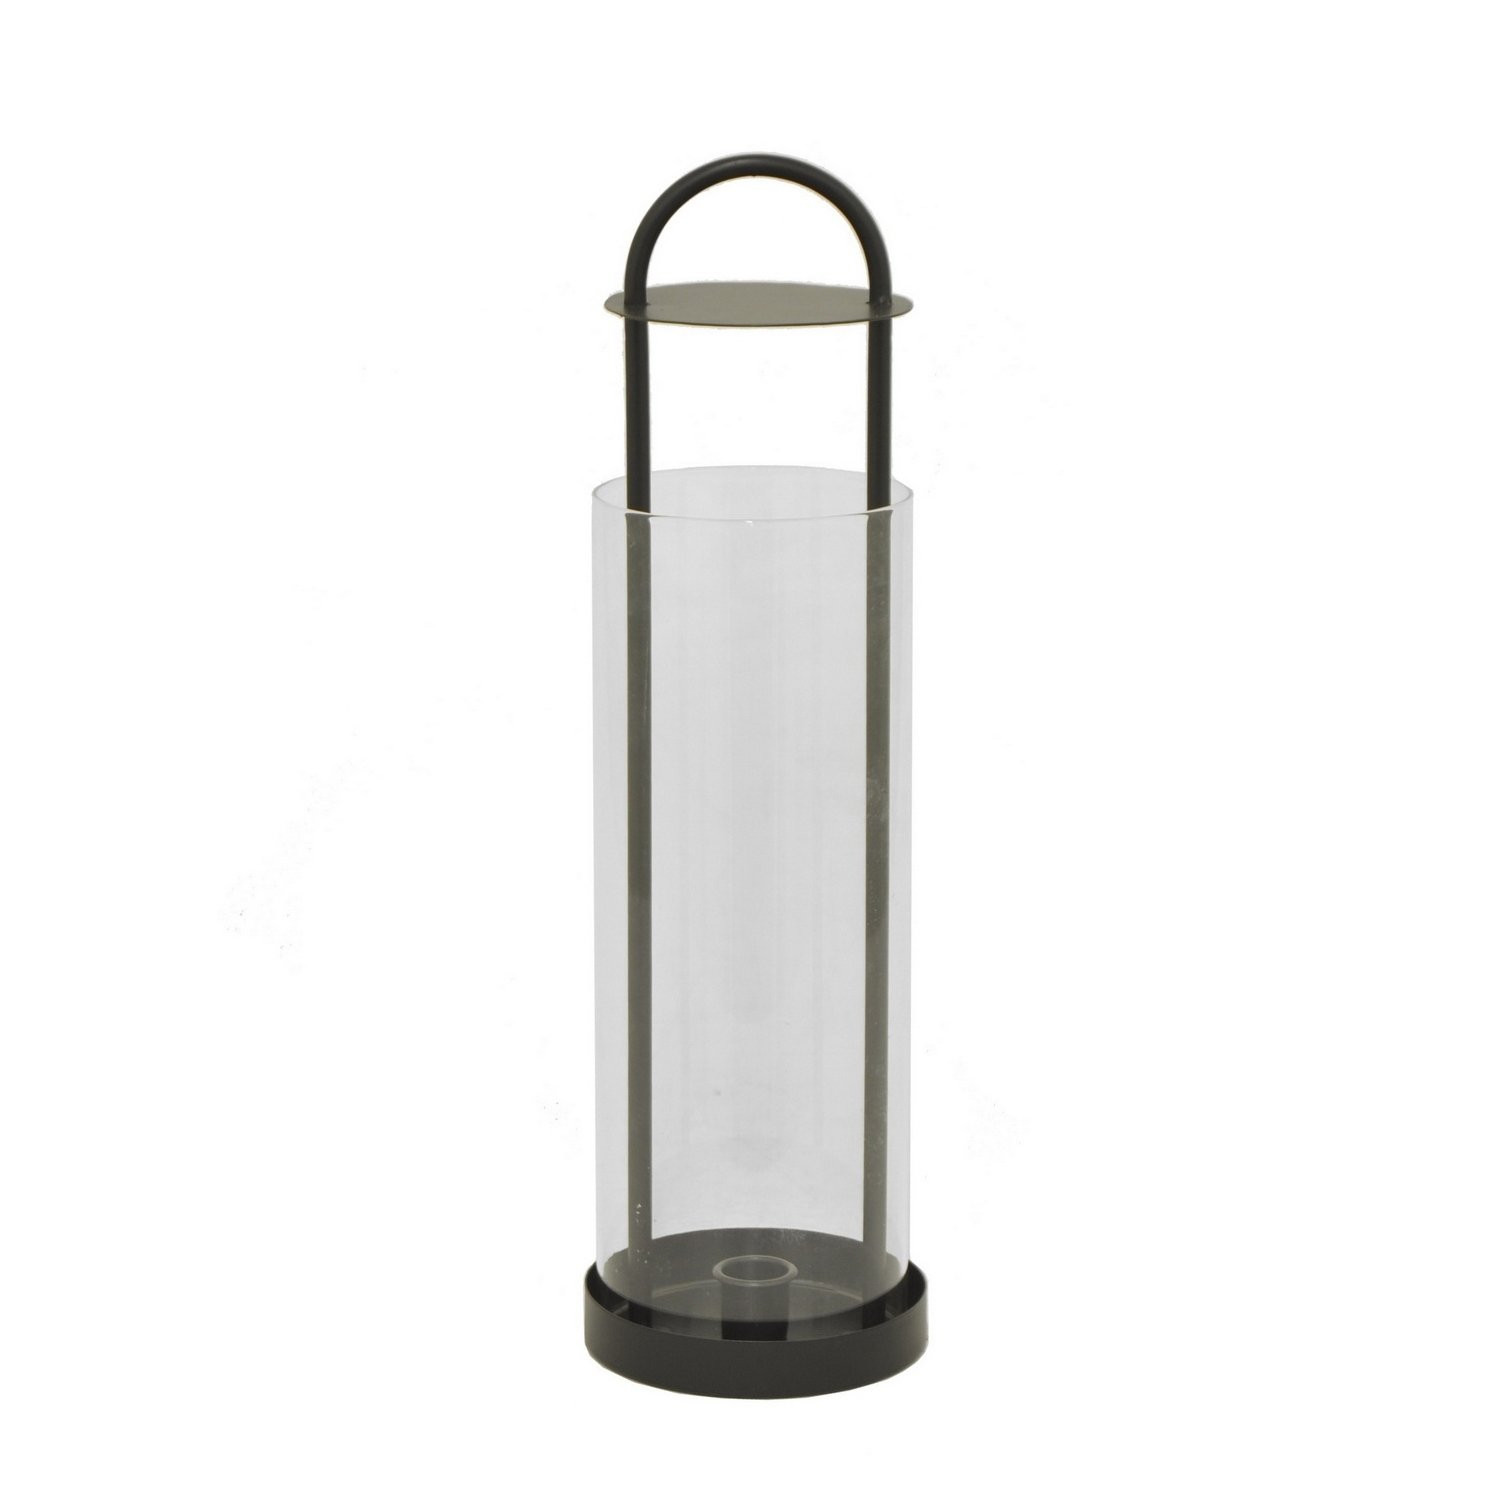 12 Elegant 16 Inch Cylinder Vases 2024 free download 16 inch cylinder vases of shop three hands 16 5 glass candle holder with black metal base in throughout shop three hands 16 5 glass candle holder with black metal base in black free shipping